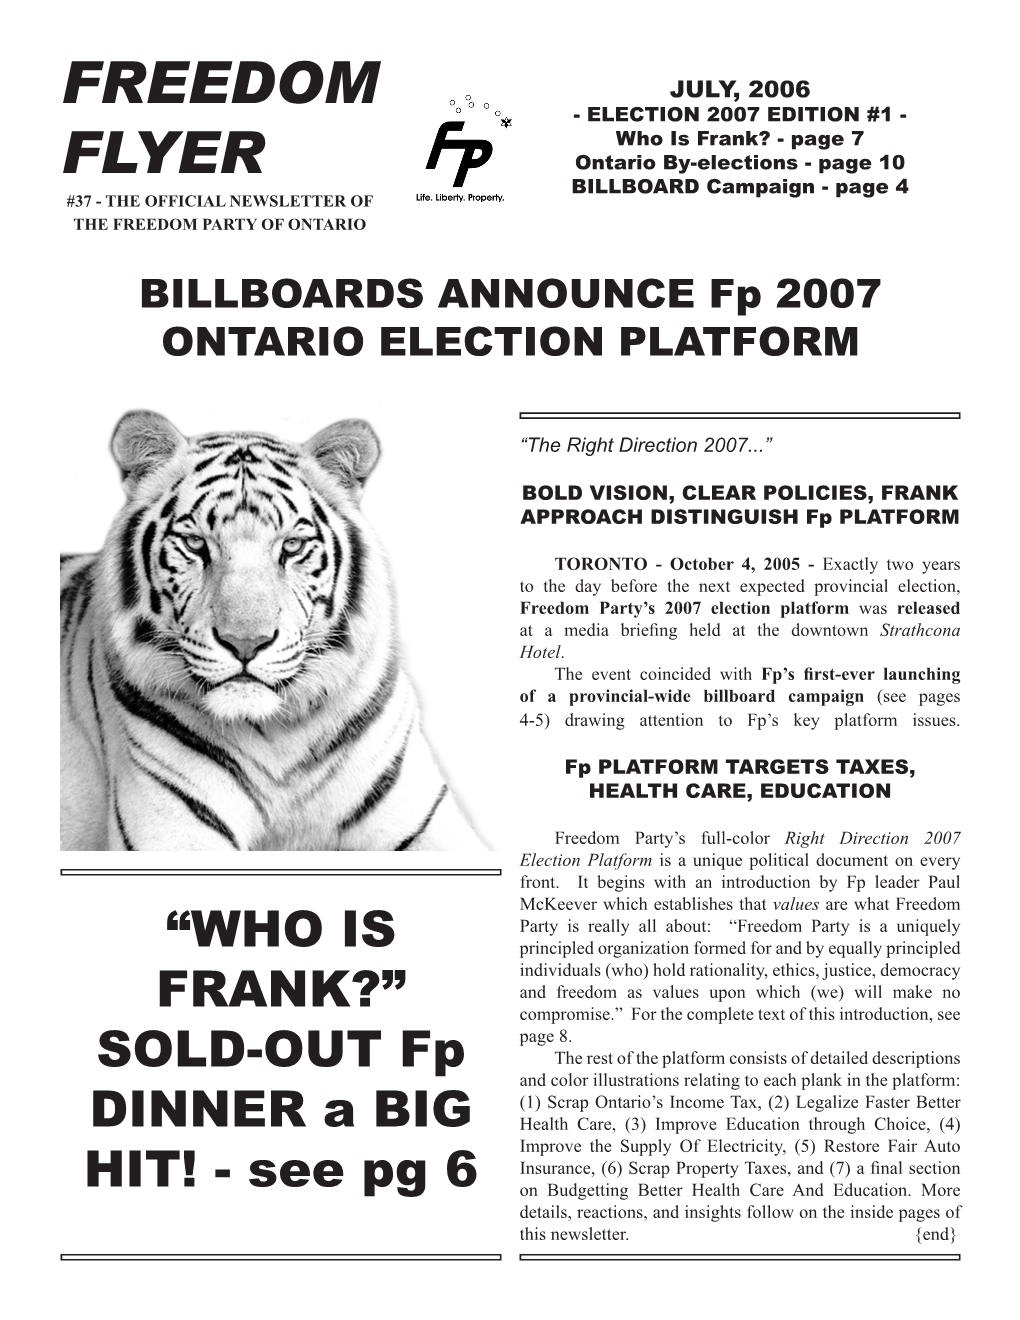 Freedom Flyer, Consent Magazine, and Happened in the Last Three Ontario By-Elections